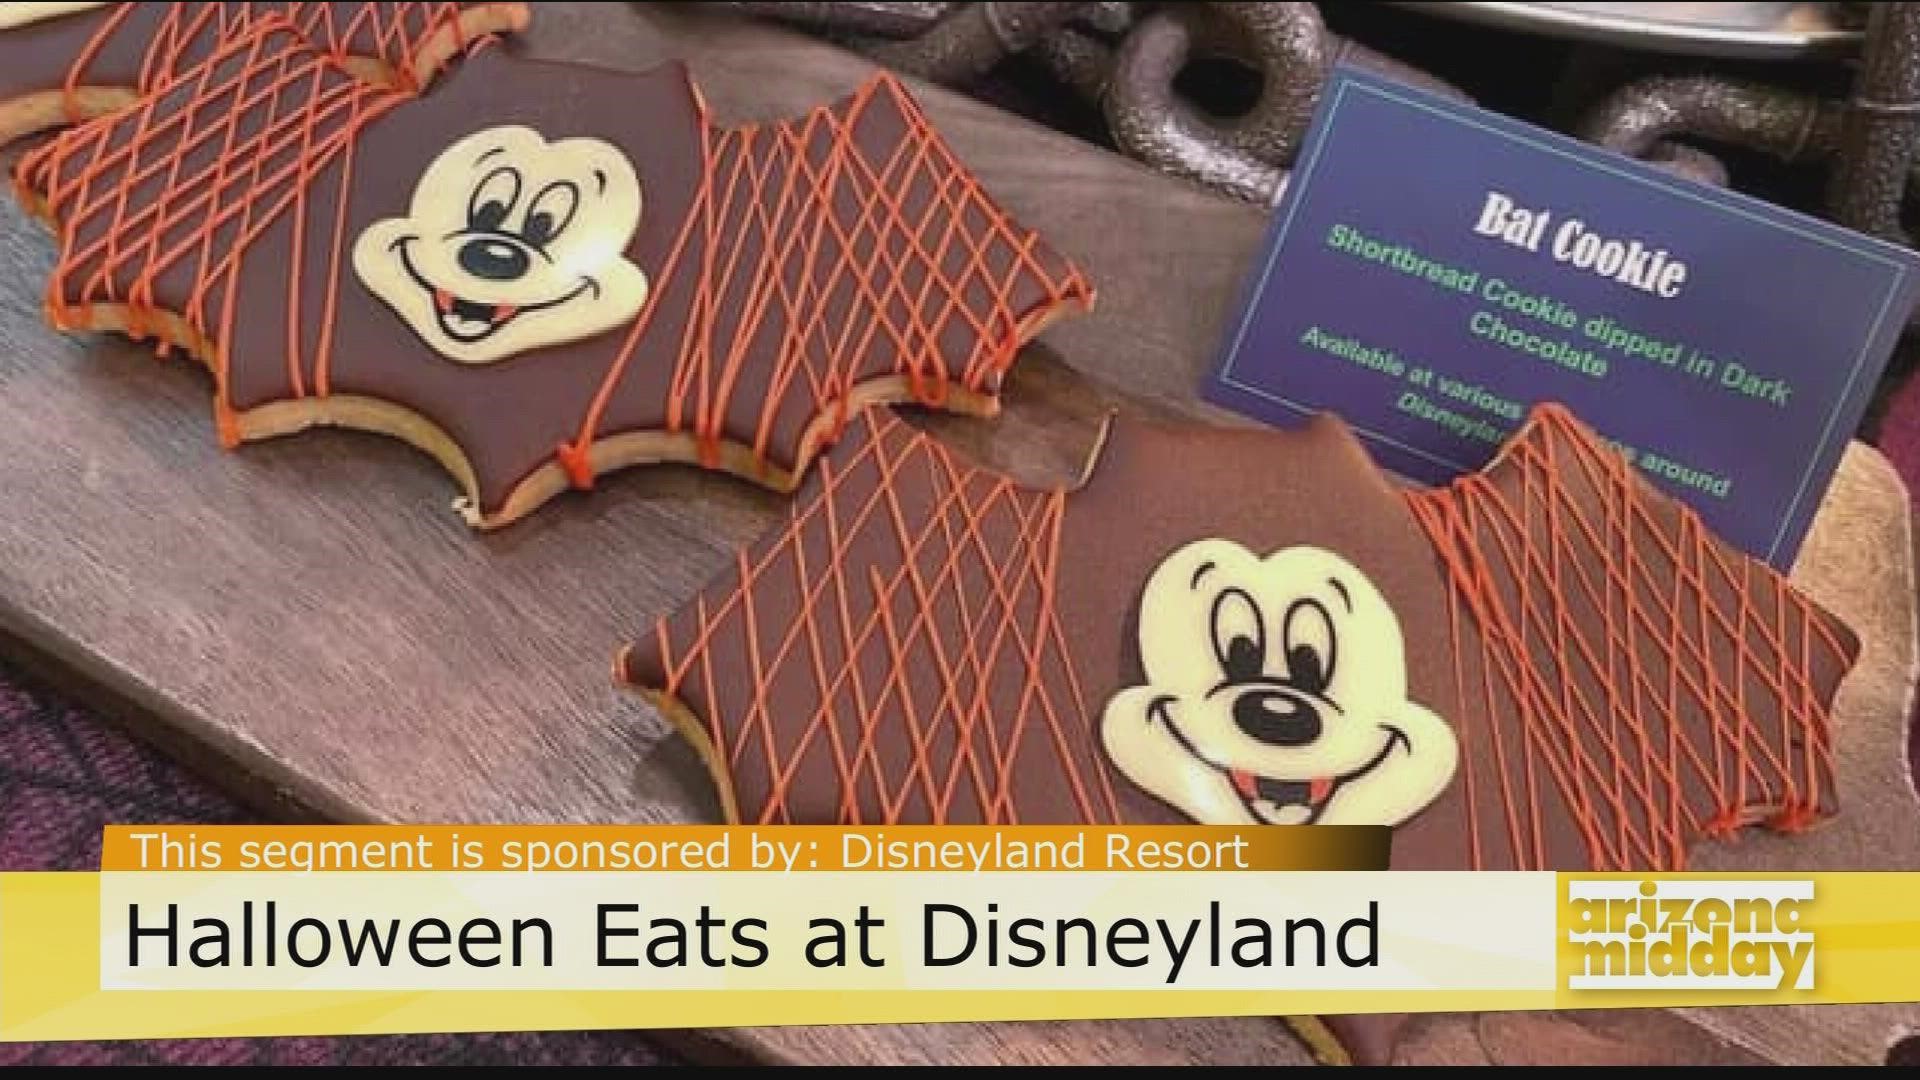 Pastry Sous Chef, Christina Orejel, shows us the Halloween Eats at the Disneyland Resort this Spooky Season!